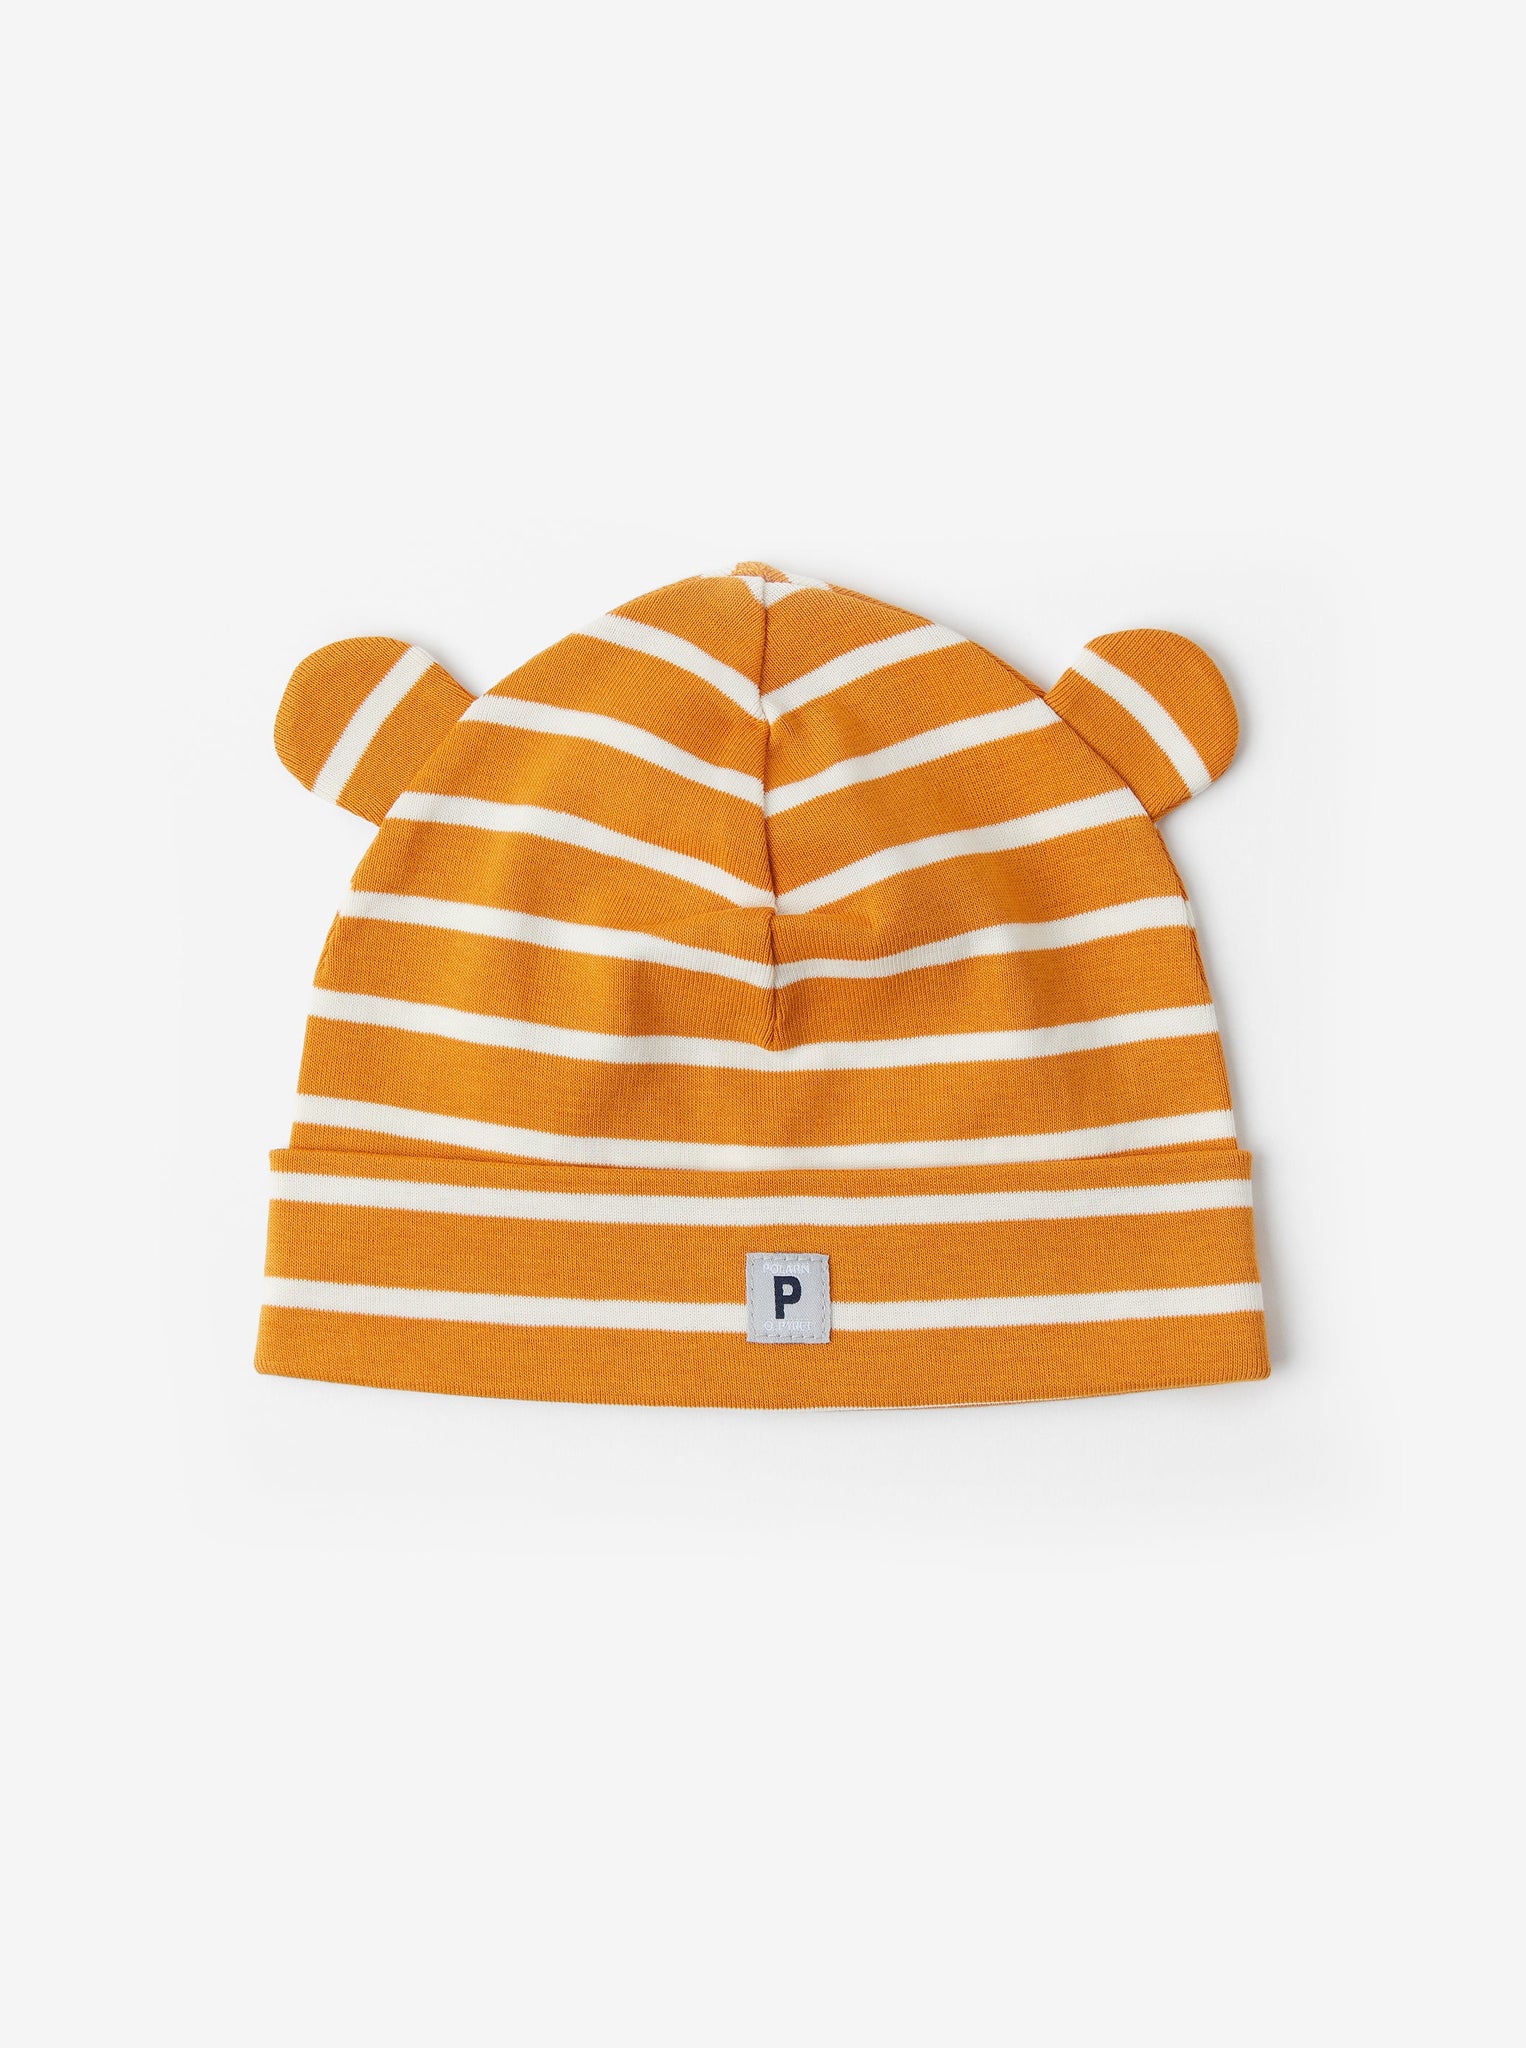 Organic Cotton Yellow Baby Beanie Hat from the Polarn O. Pyret Kidswear collection. Clothes made using sustainably sourced materials.